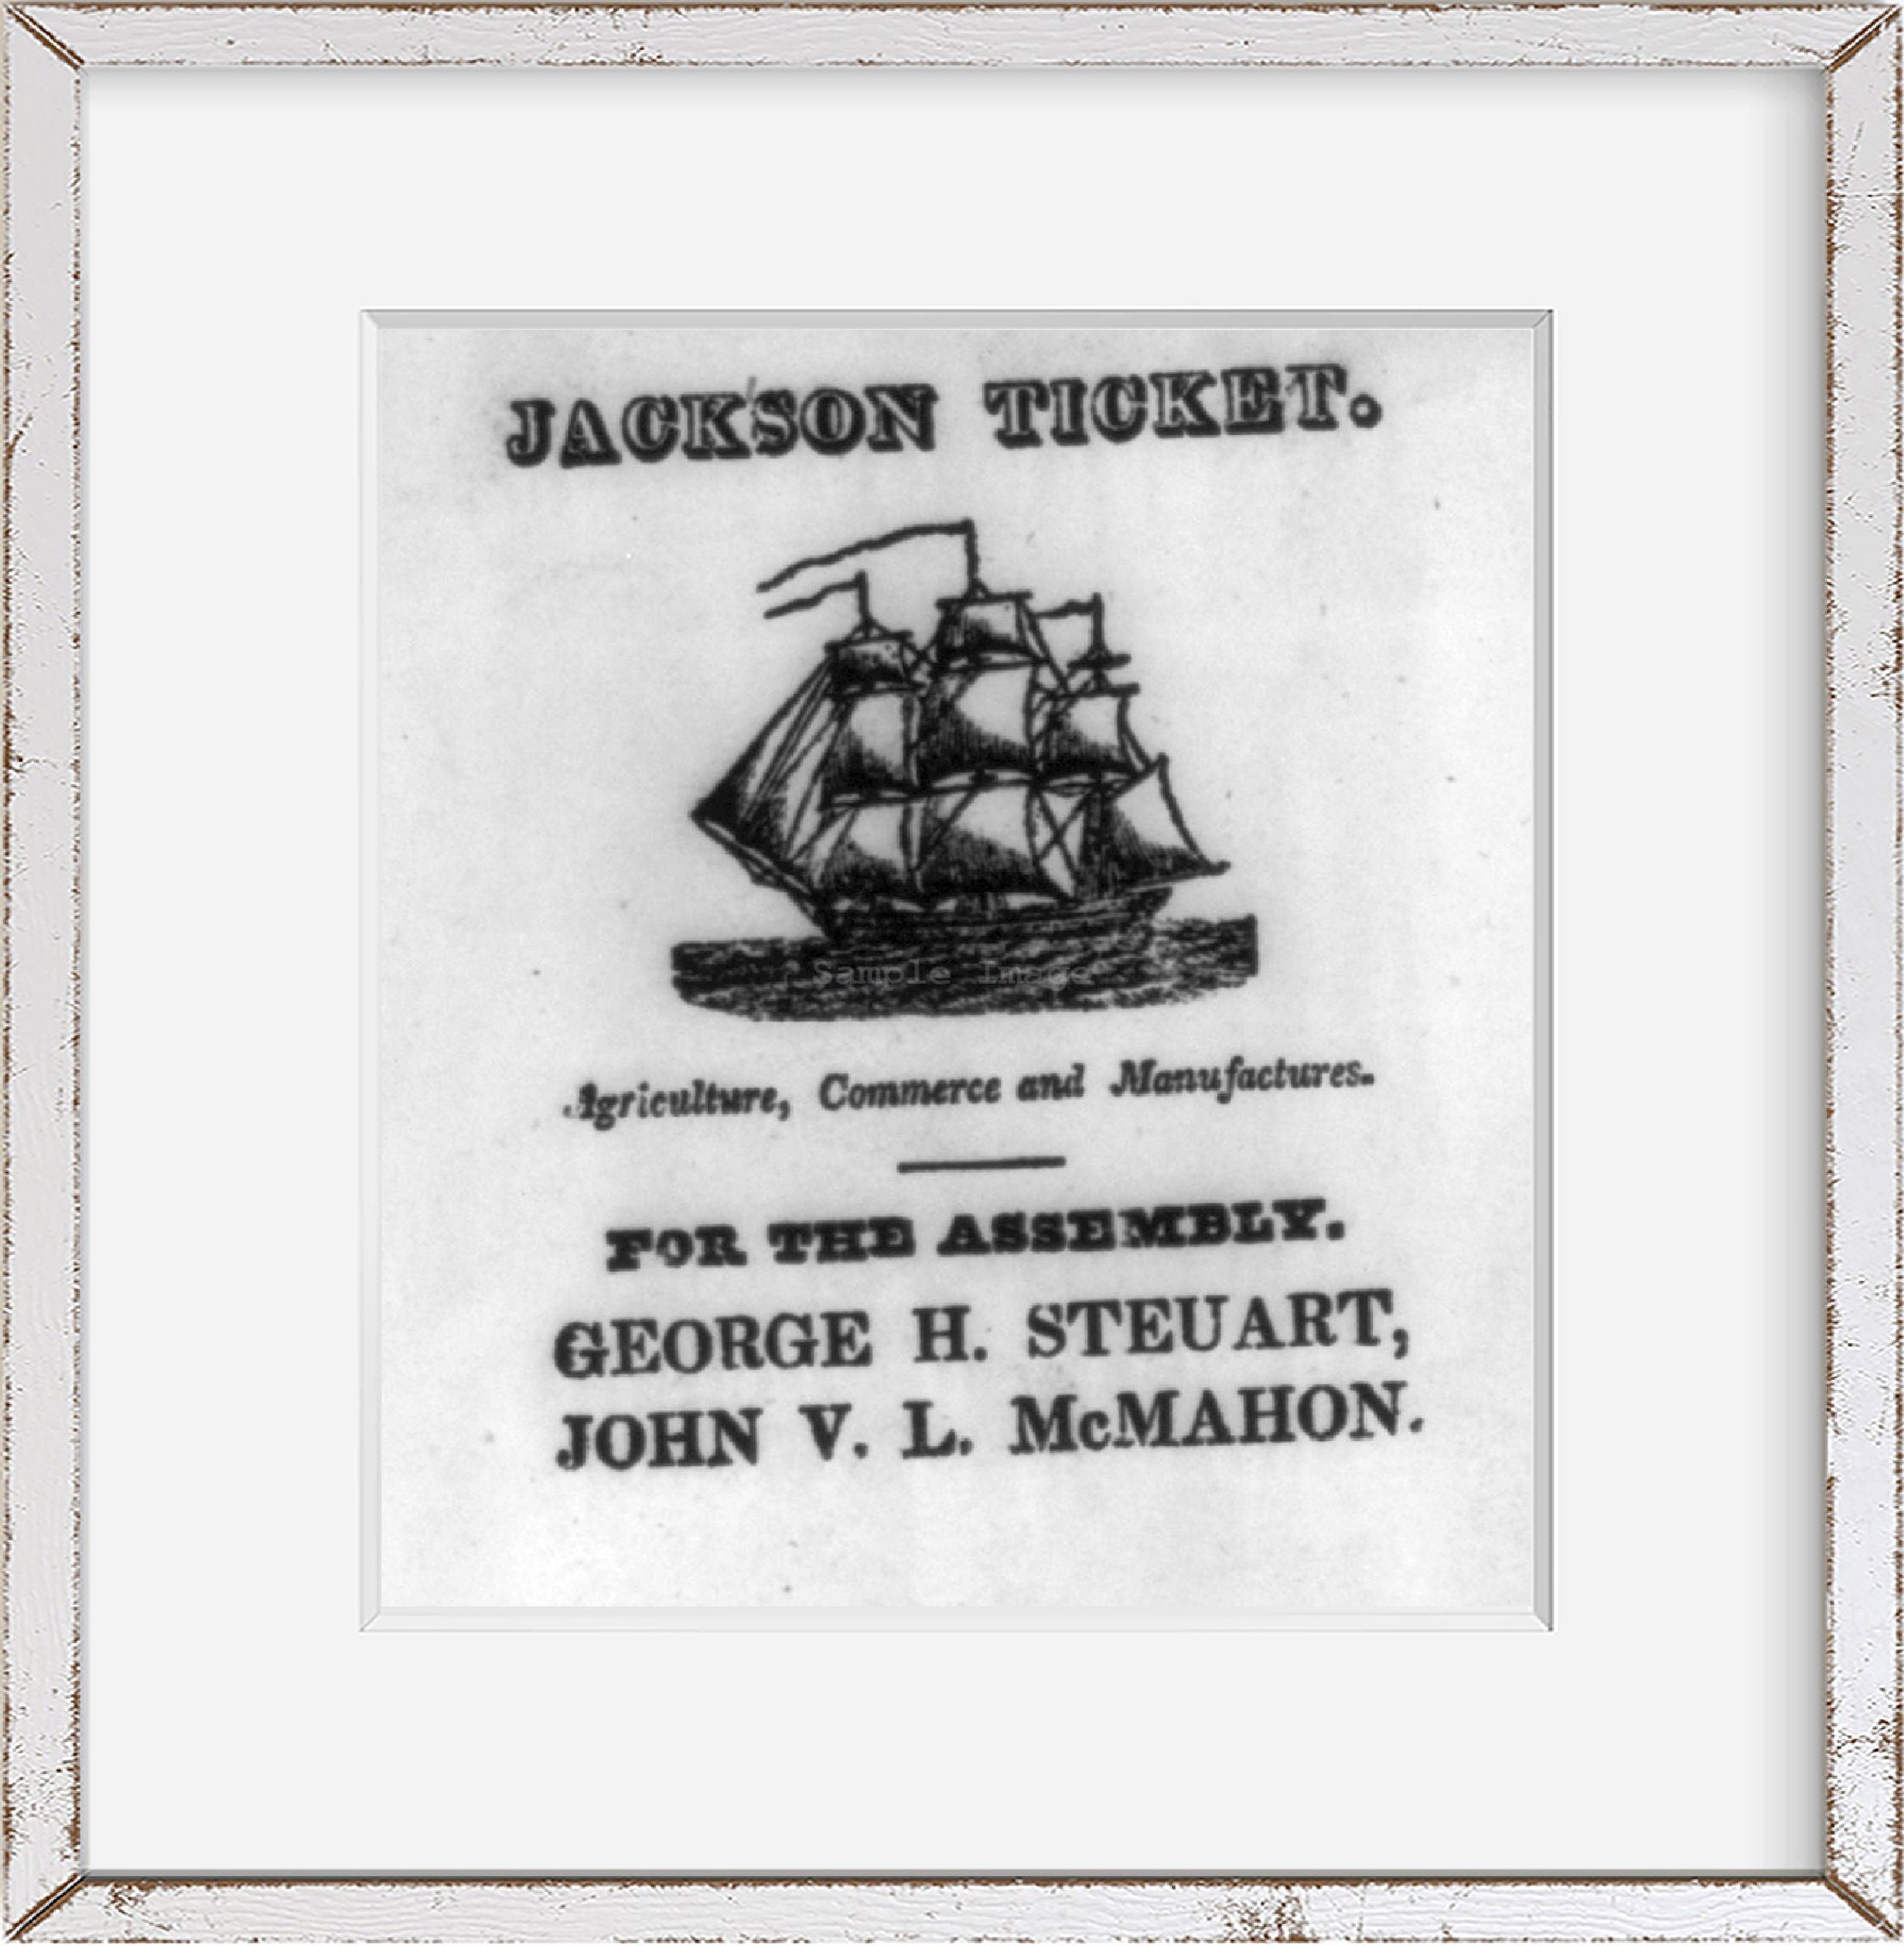 Photo: A Jackson ticket, agriculture, commerce, manufactures, 1828 1